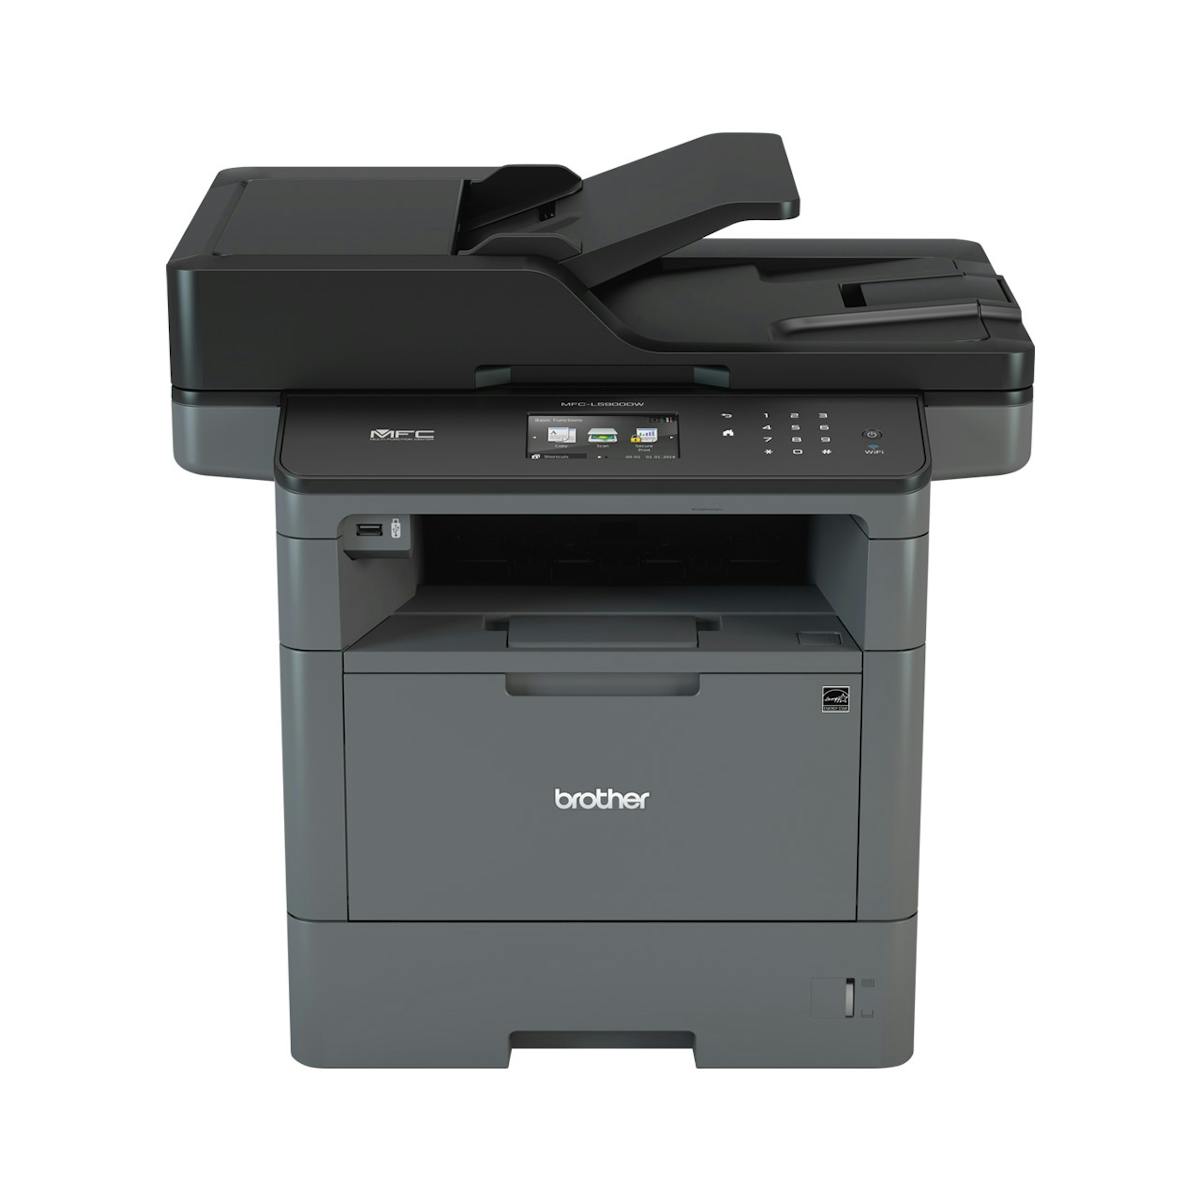 front of printer